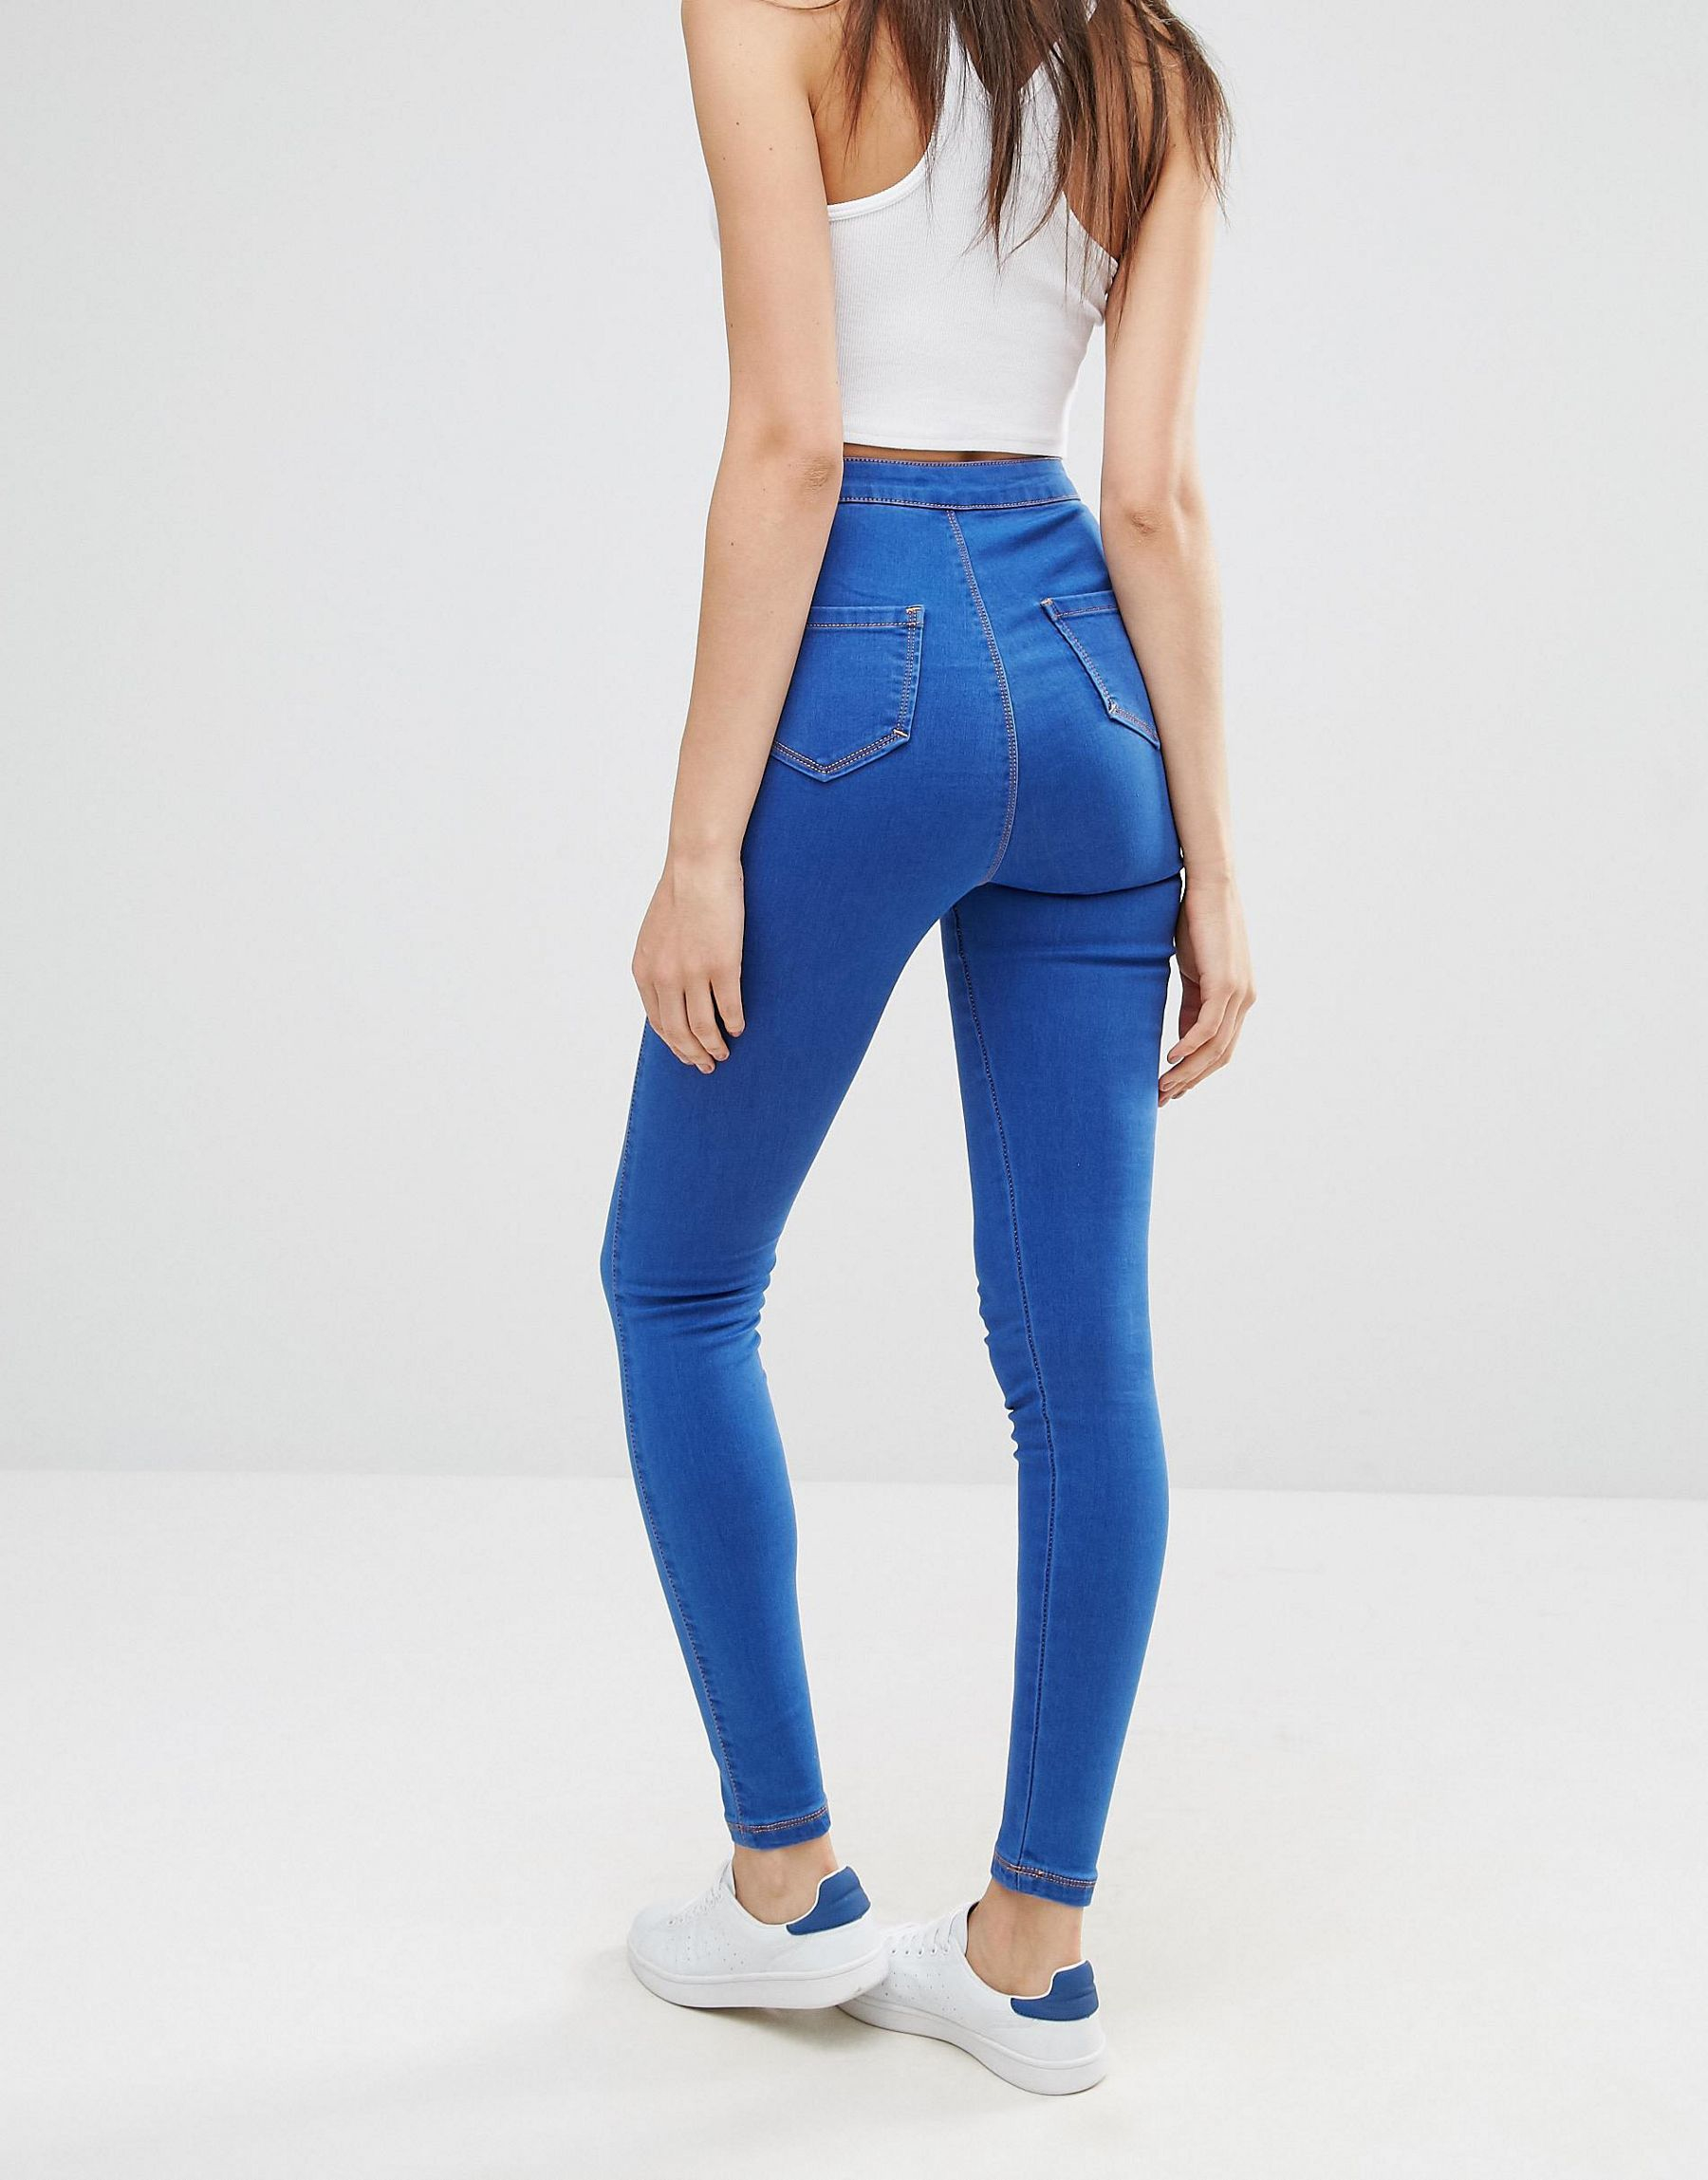 Missguided Denim Vice High Waisted Tube Jean in Blue - Lyst